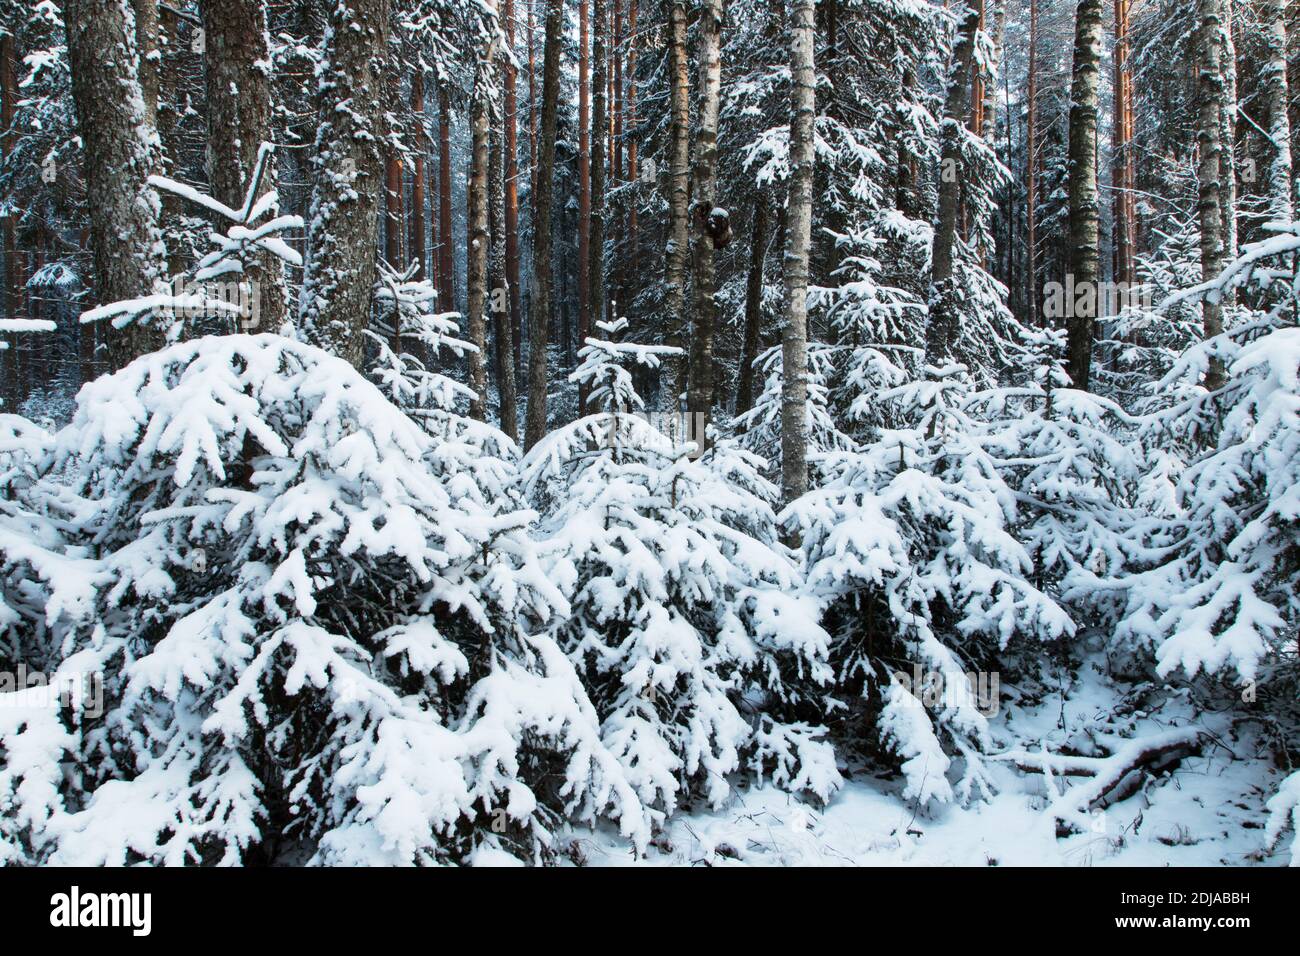 Wintery boreal forest with small snowy spruce trees in Estonia, Northern Europe. Stock Photo